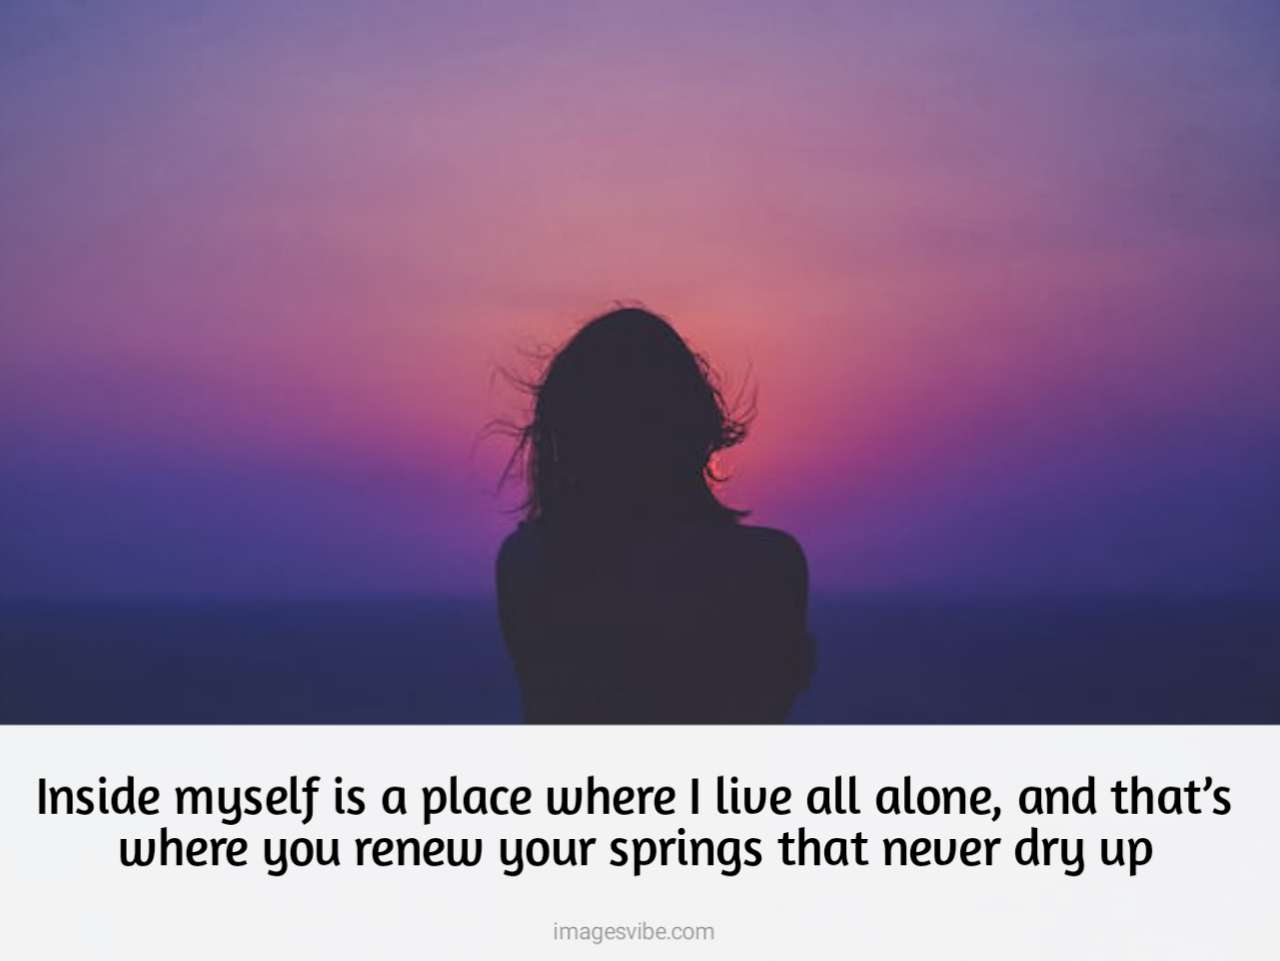 Sad Lonely Images With Quotes & Messages - Images Vibe